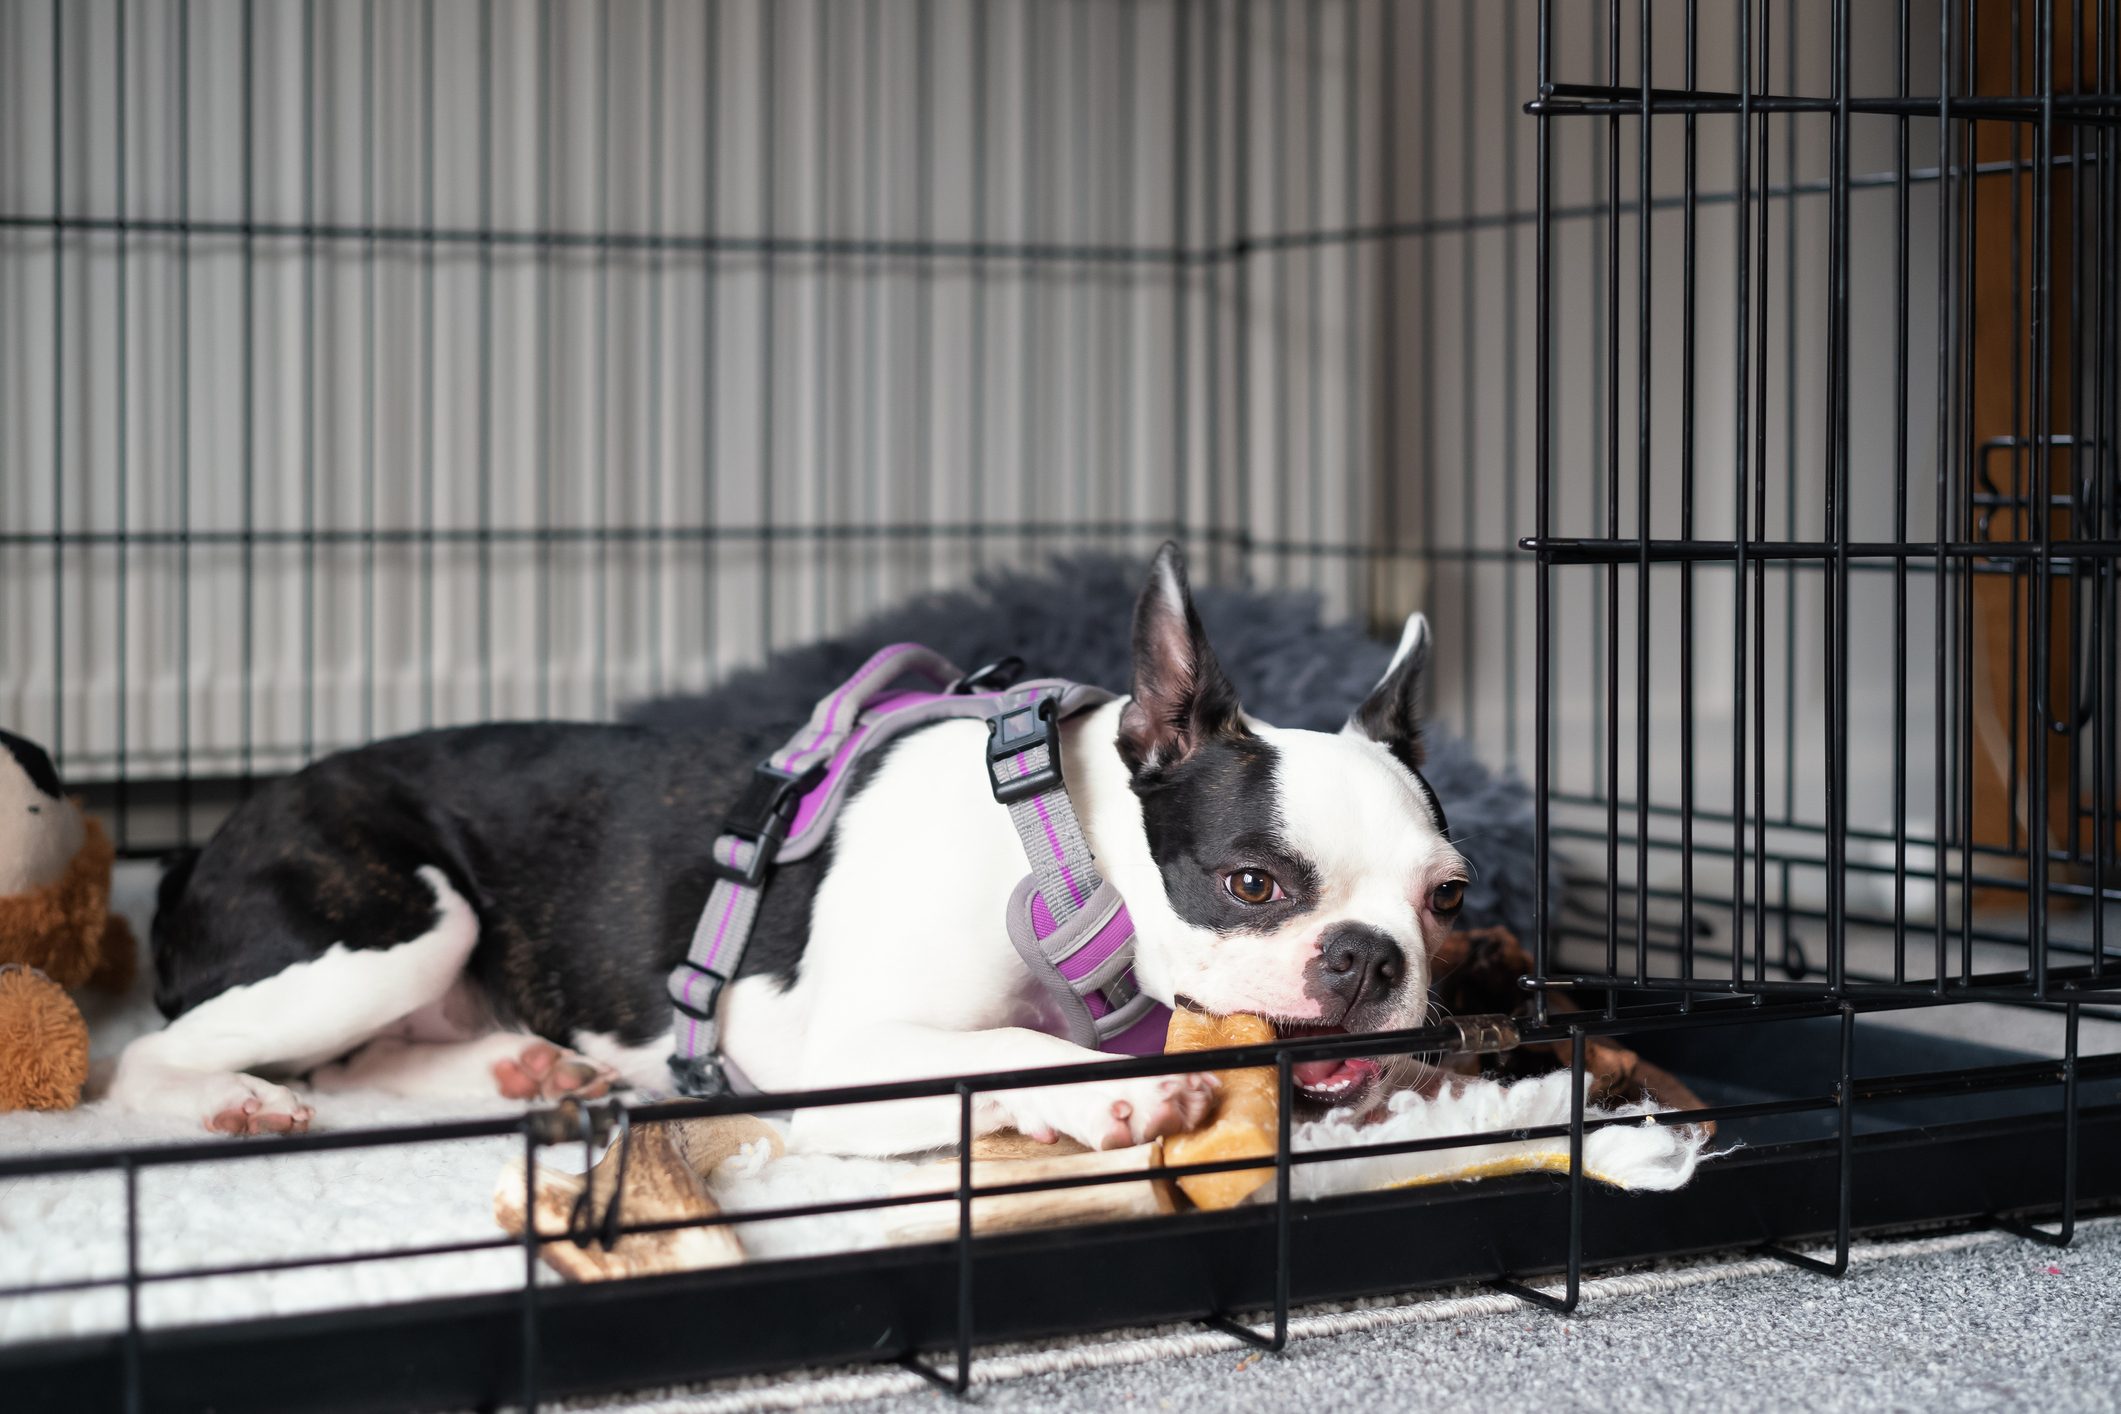 Boston Terrier puppy inside a cage or crate with the door open. She is lying down chewing a teething aid chew. She is wearing a harness.